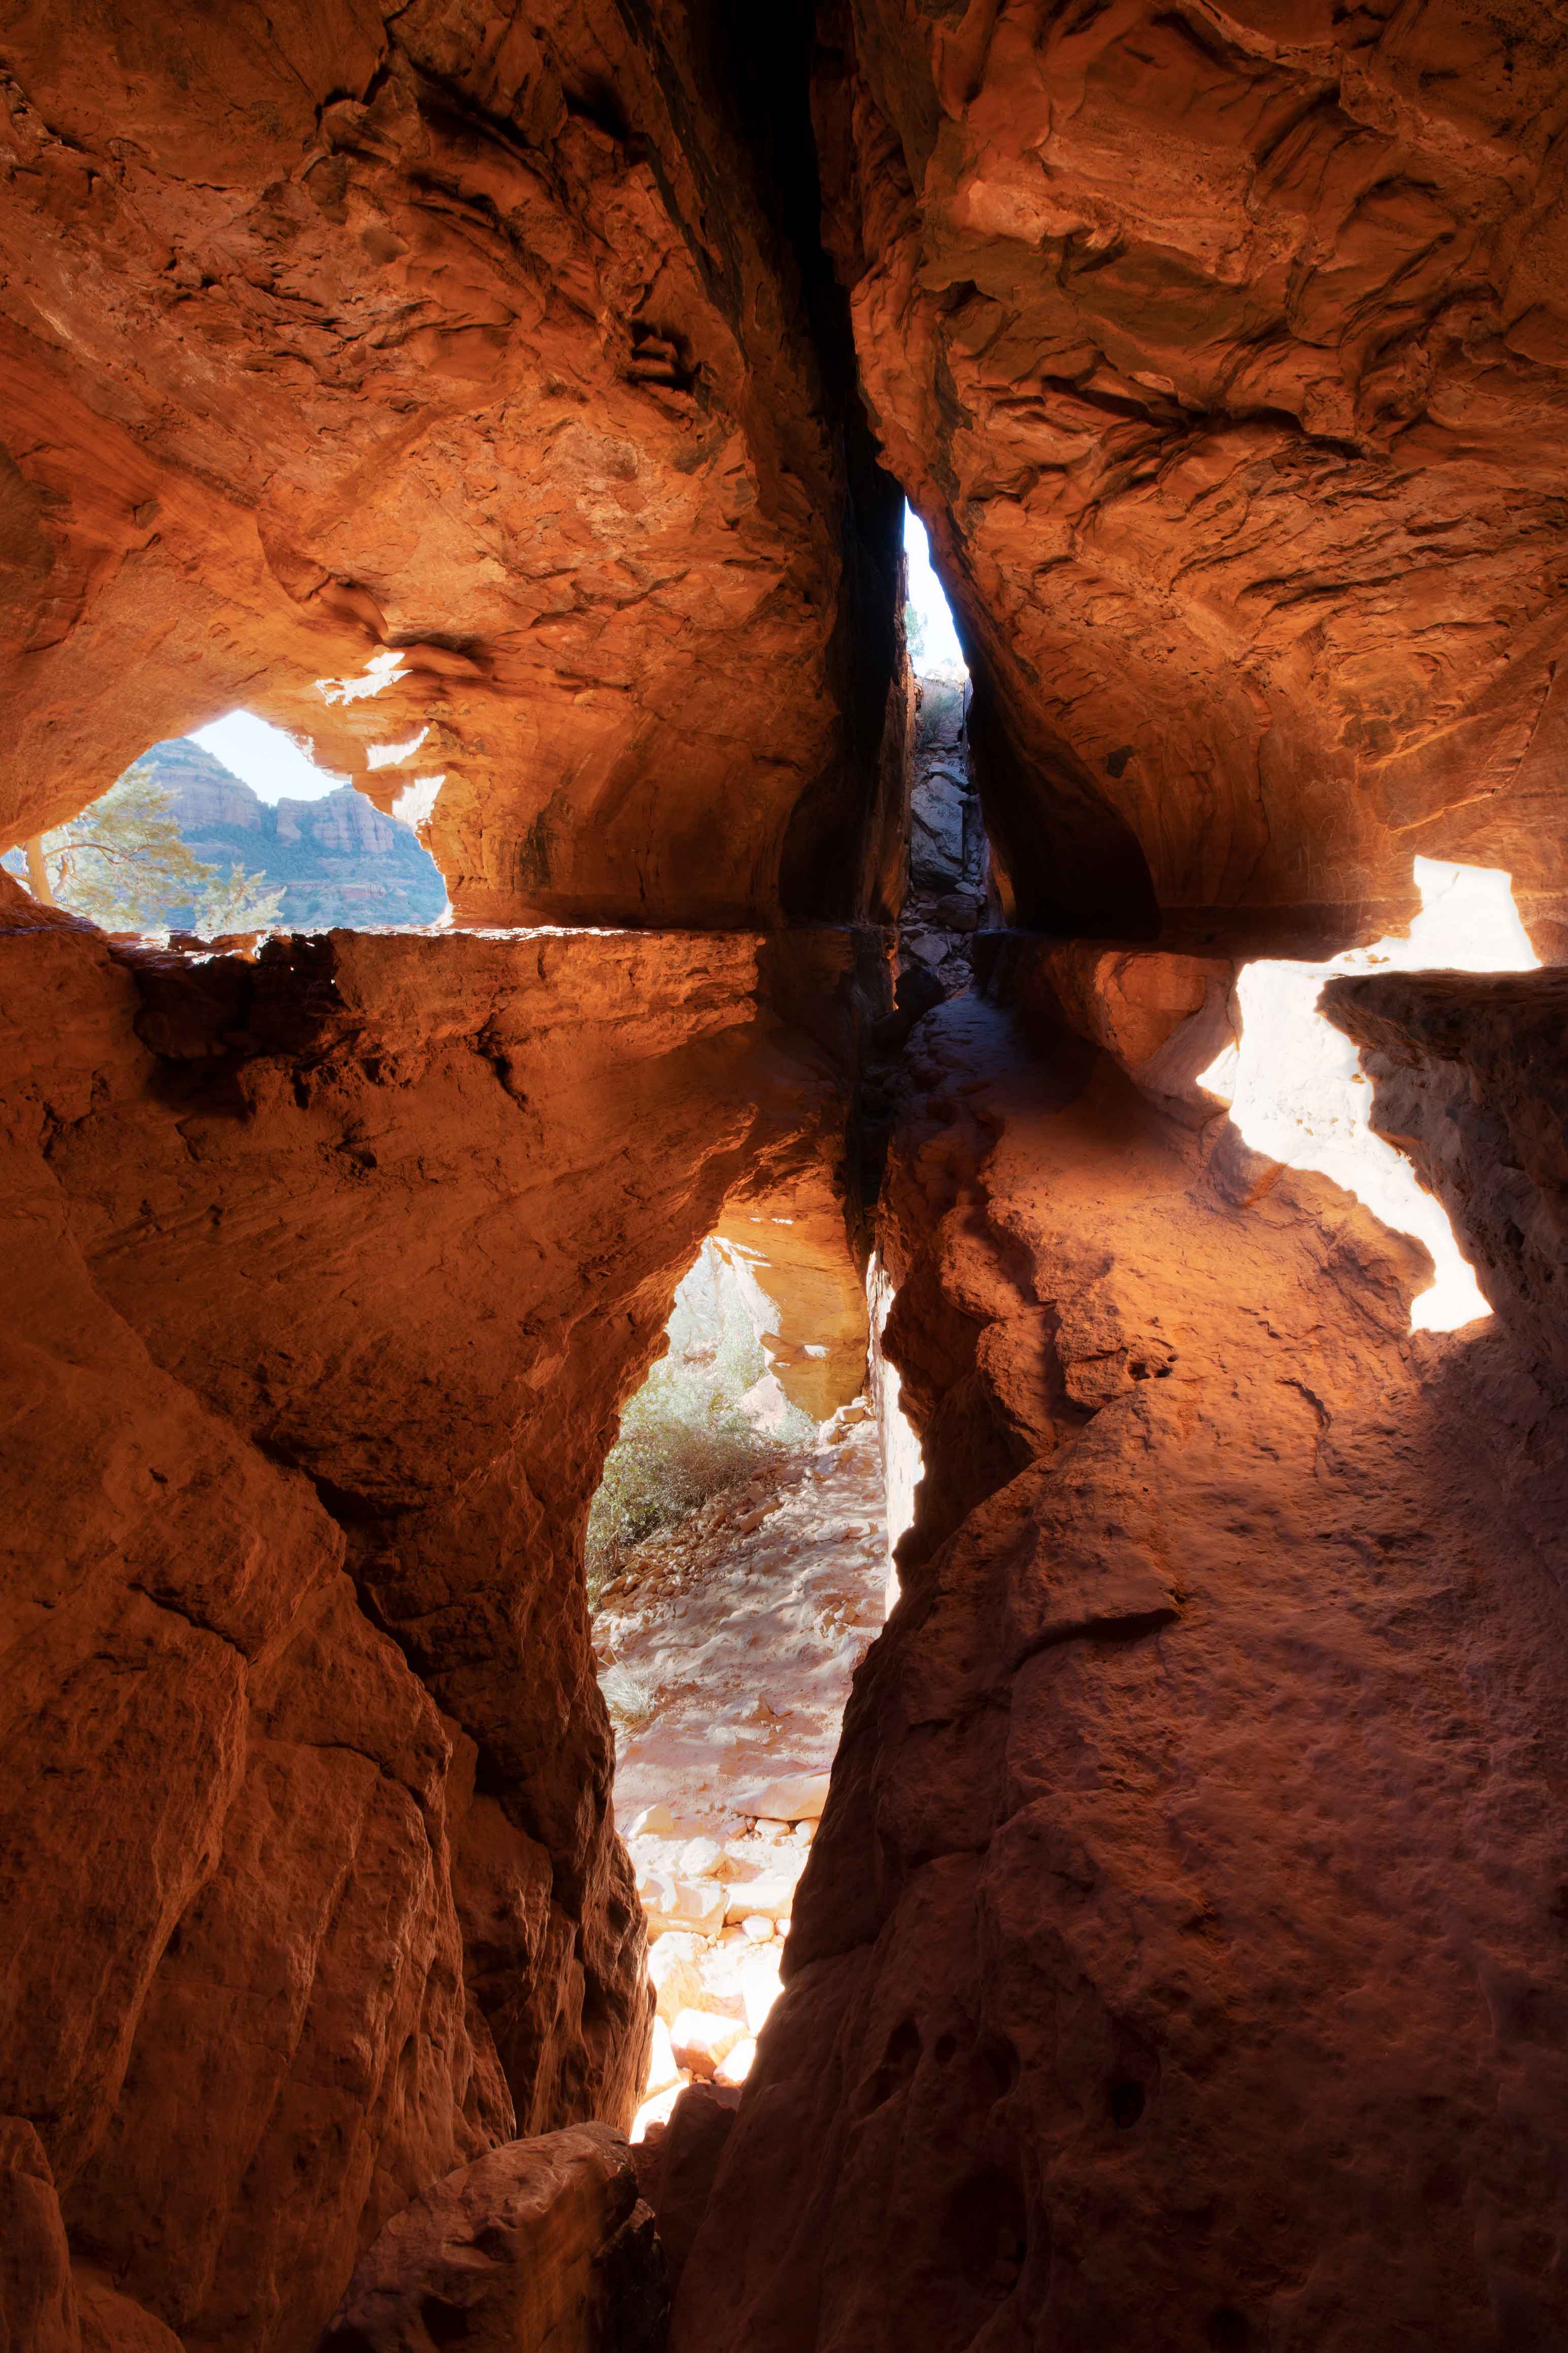 A cave-like rock formation on the Coconino National Forest, Arizona (red rock country near Sedona)